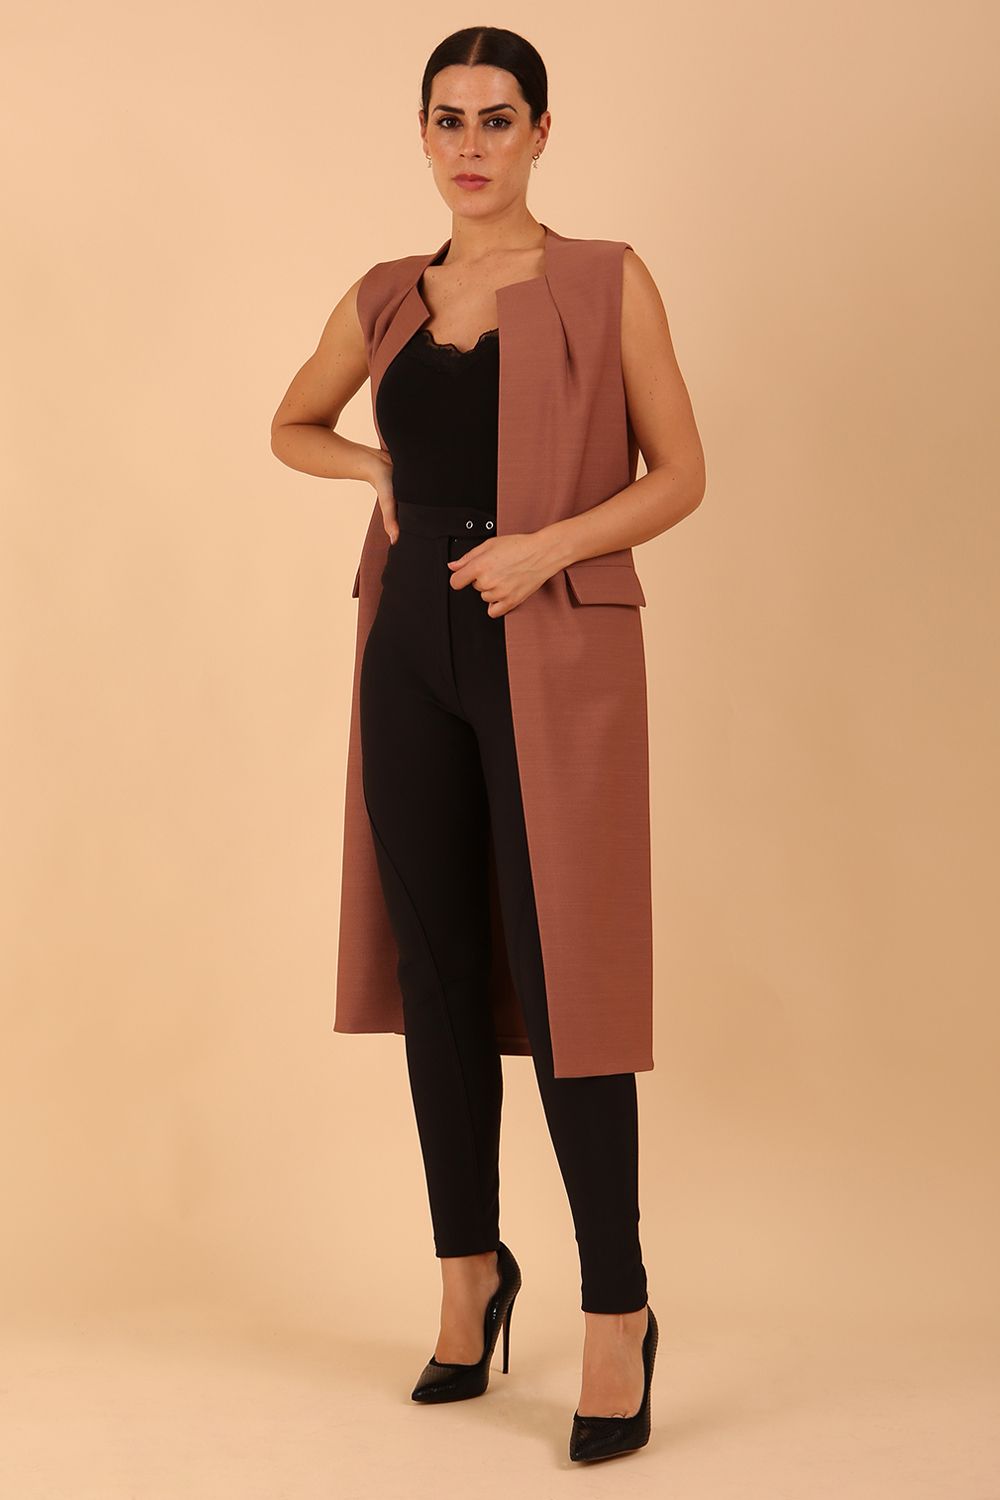 model wearing a divacatwalk Seed Harvard Sleeveless Coat midi length in Acorn Brown colour front